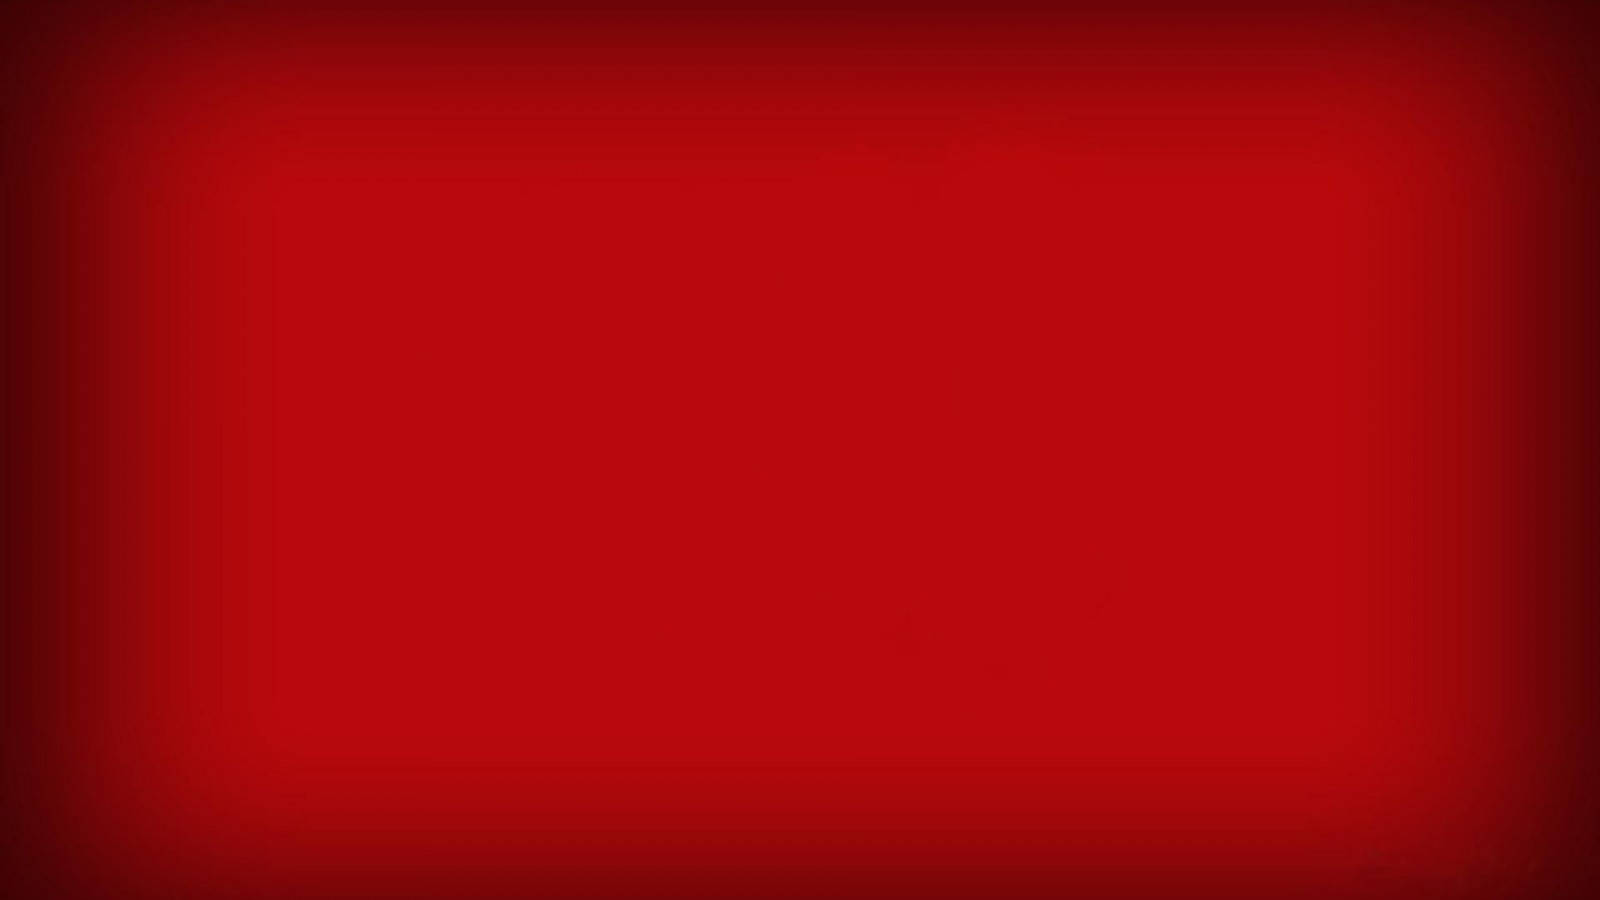 Simple Scarlet Color Hd Bordered Background Wallpaper